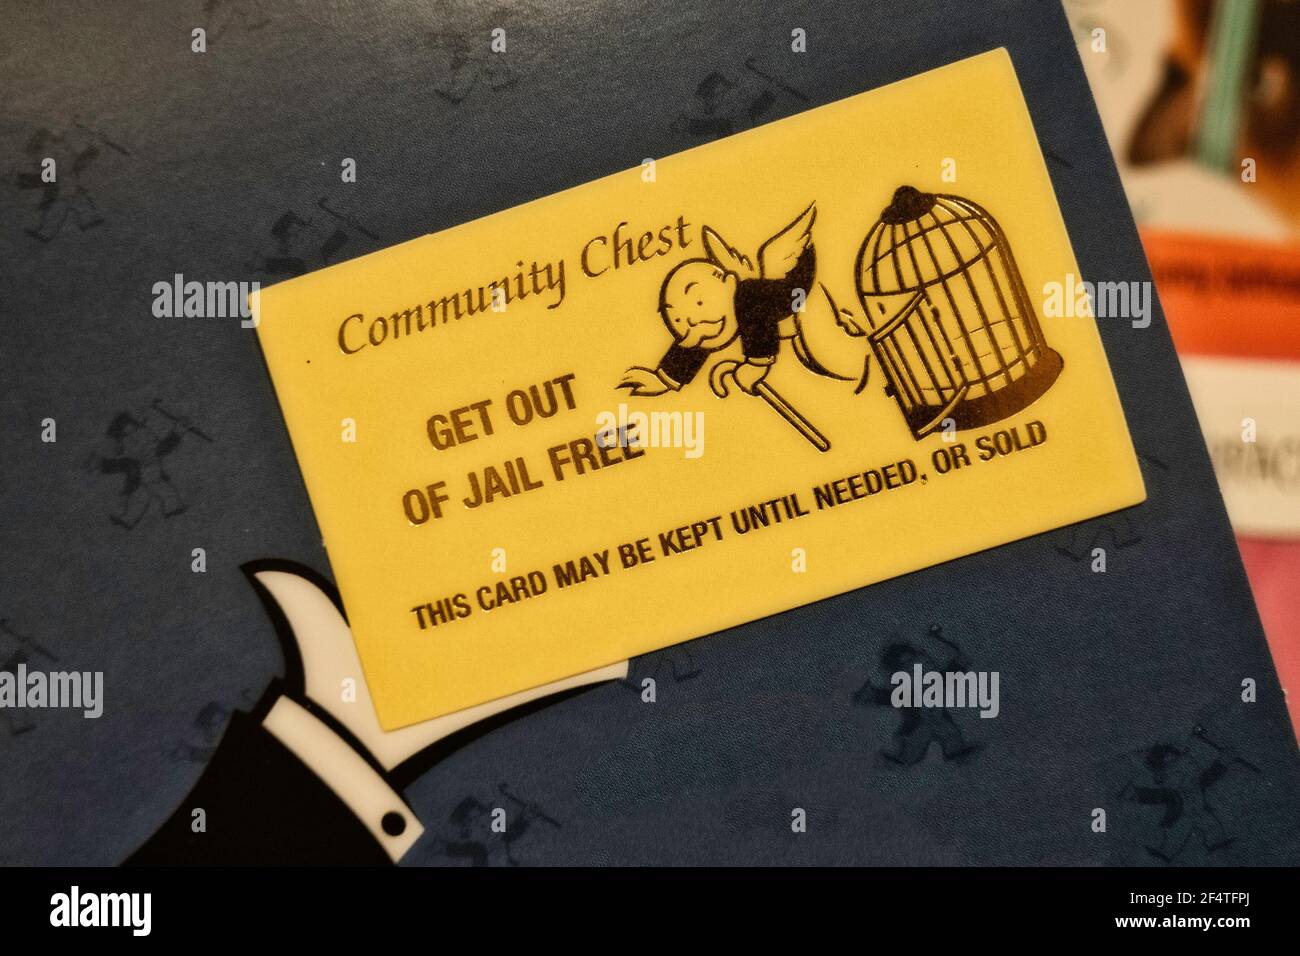 Get out of Jail Free Community Chest Card , Monopoly Board Game, USA Stock Photo